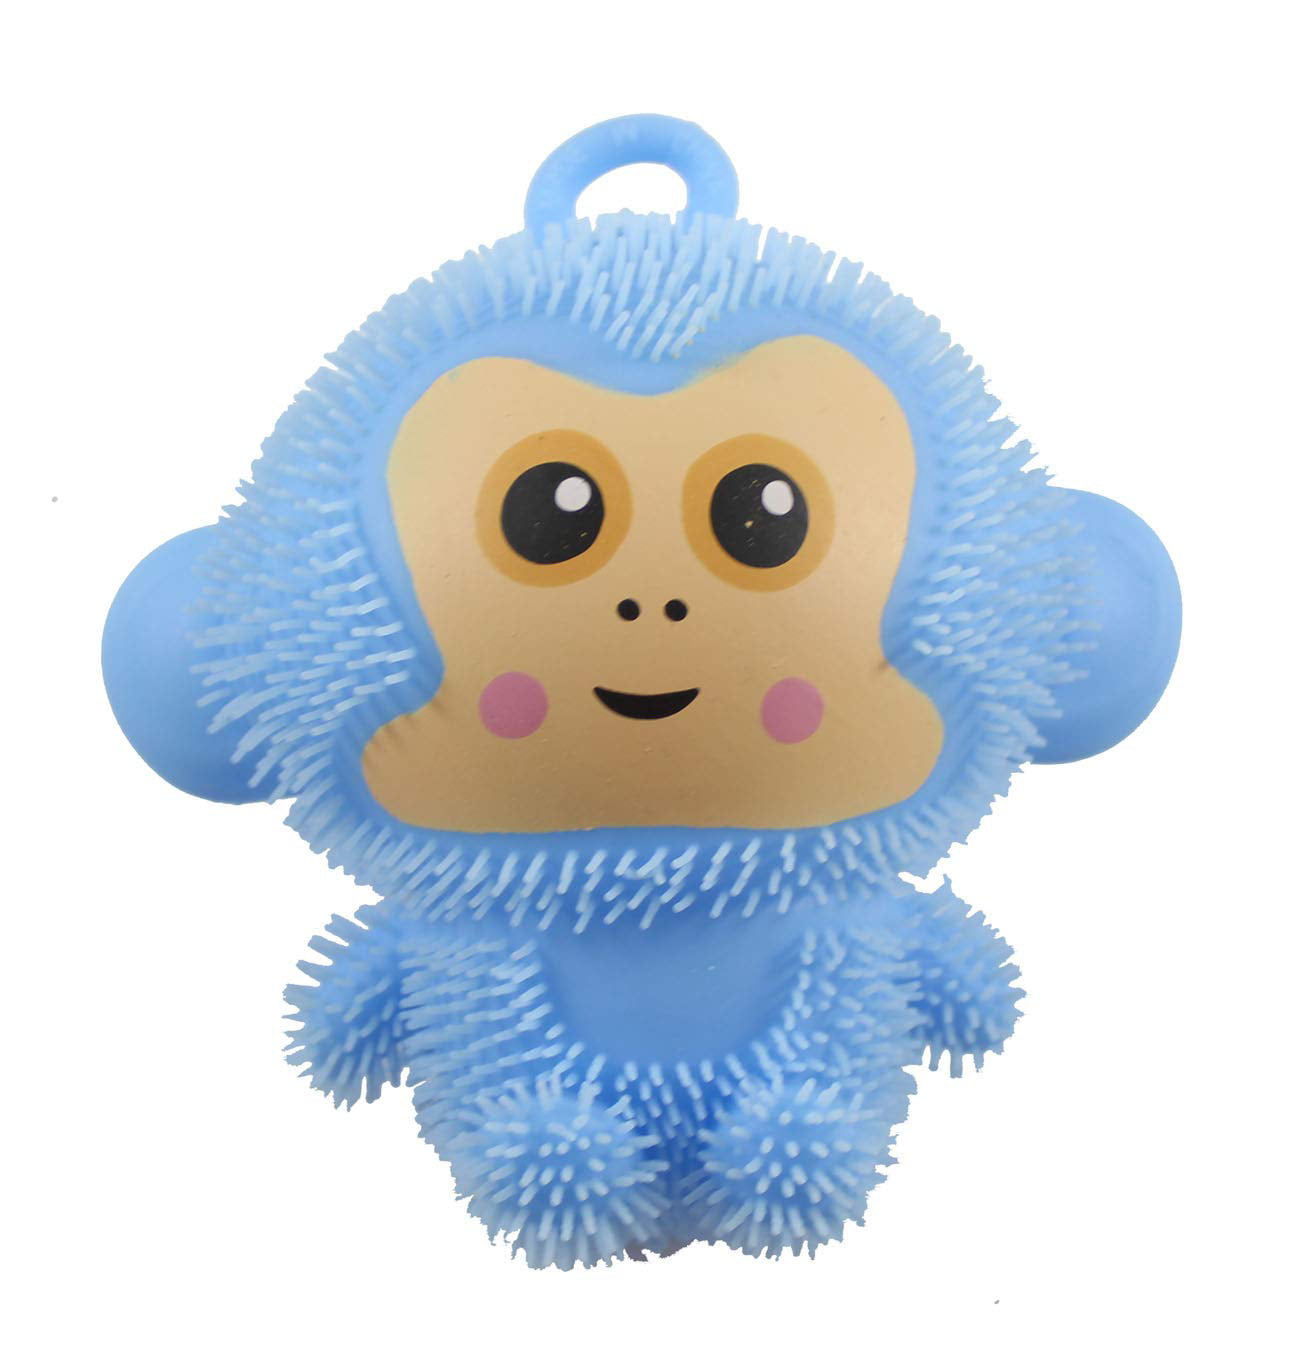 Squishy Squeezey Sensory Squeeze Air Filled Balls Light Up Puffer Monkey Toy 